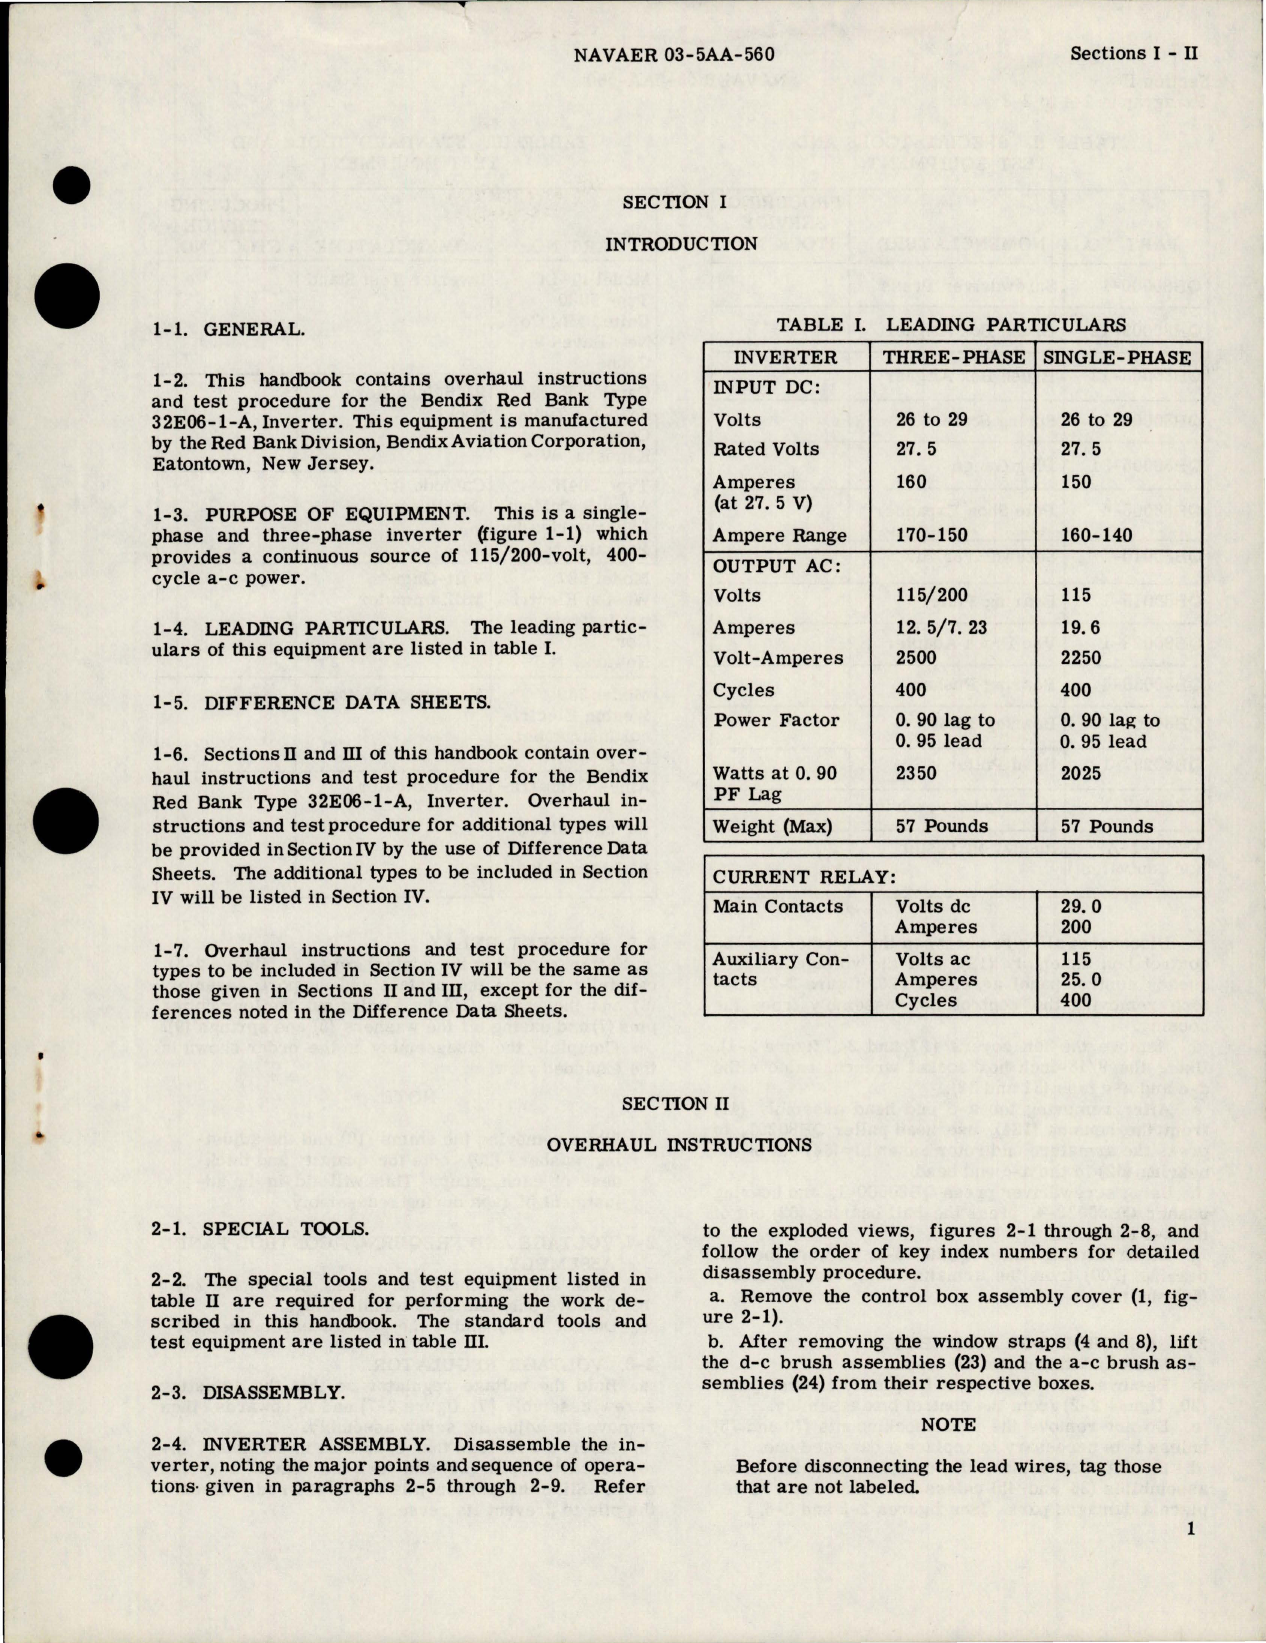 Sample page 5 from AirCorps Library document: Overhaul Instructions for Inverter - Type 32E06-1-A 